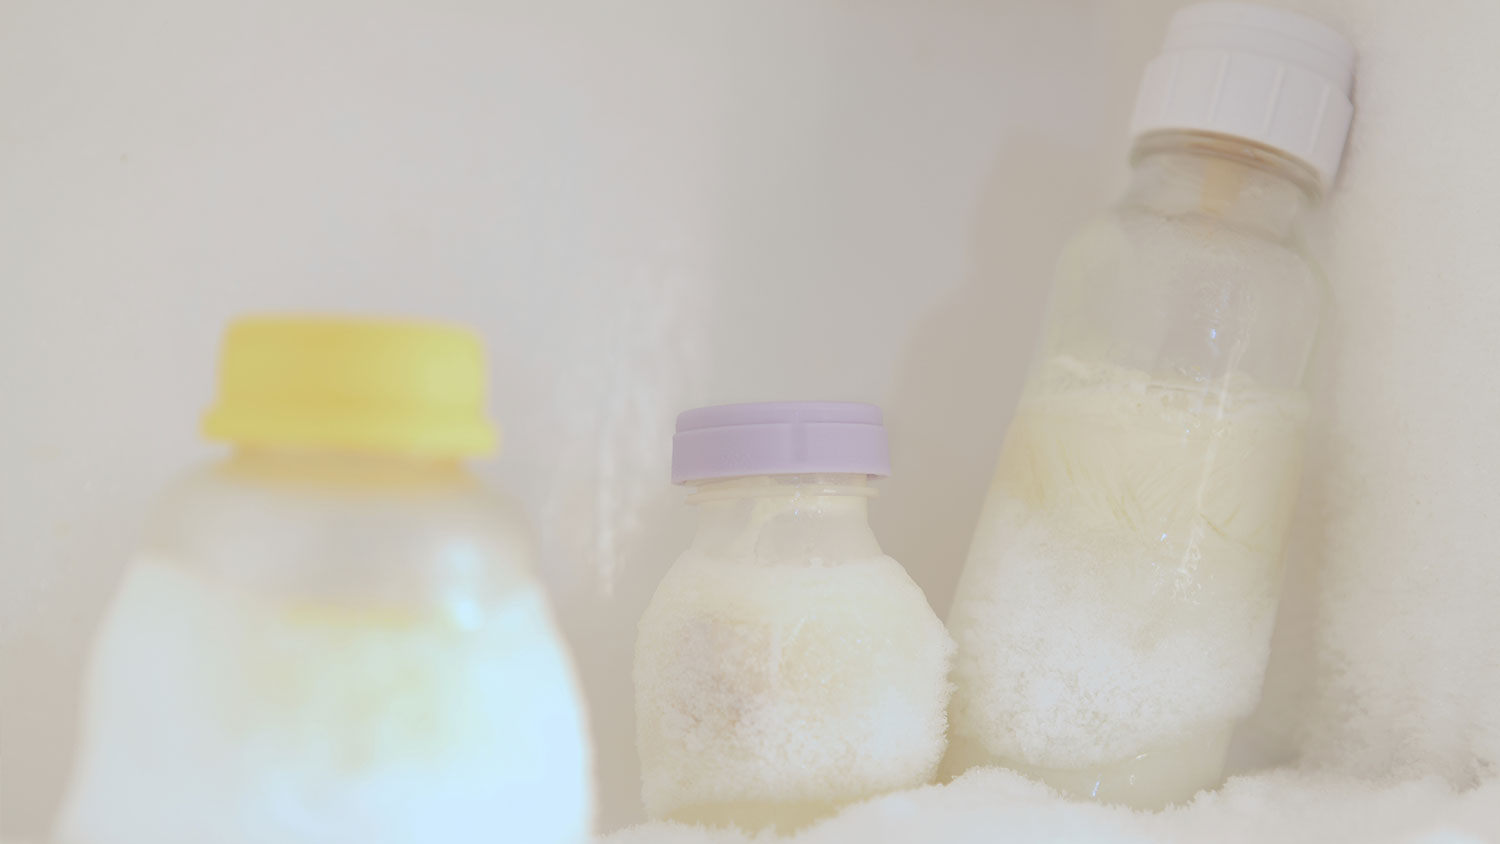 Medela Tips for Pumping Breastmilk – Packing, Freezing, Storing and Re-heating